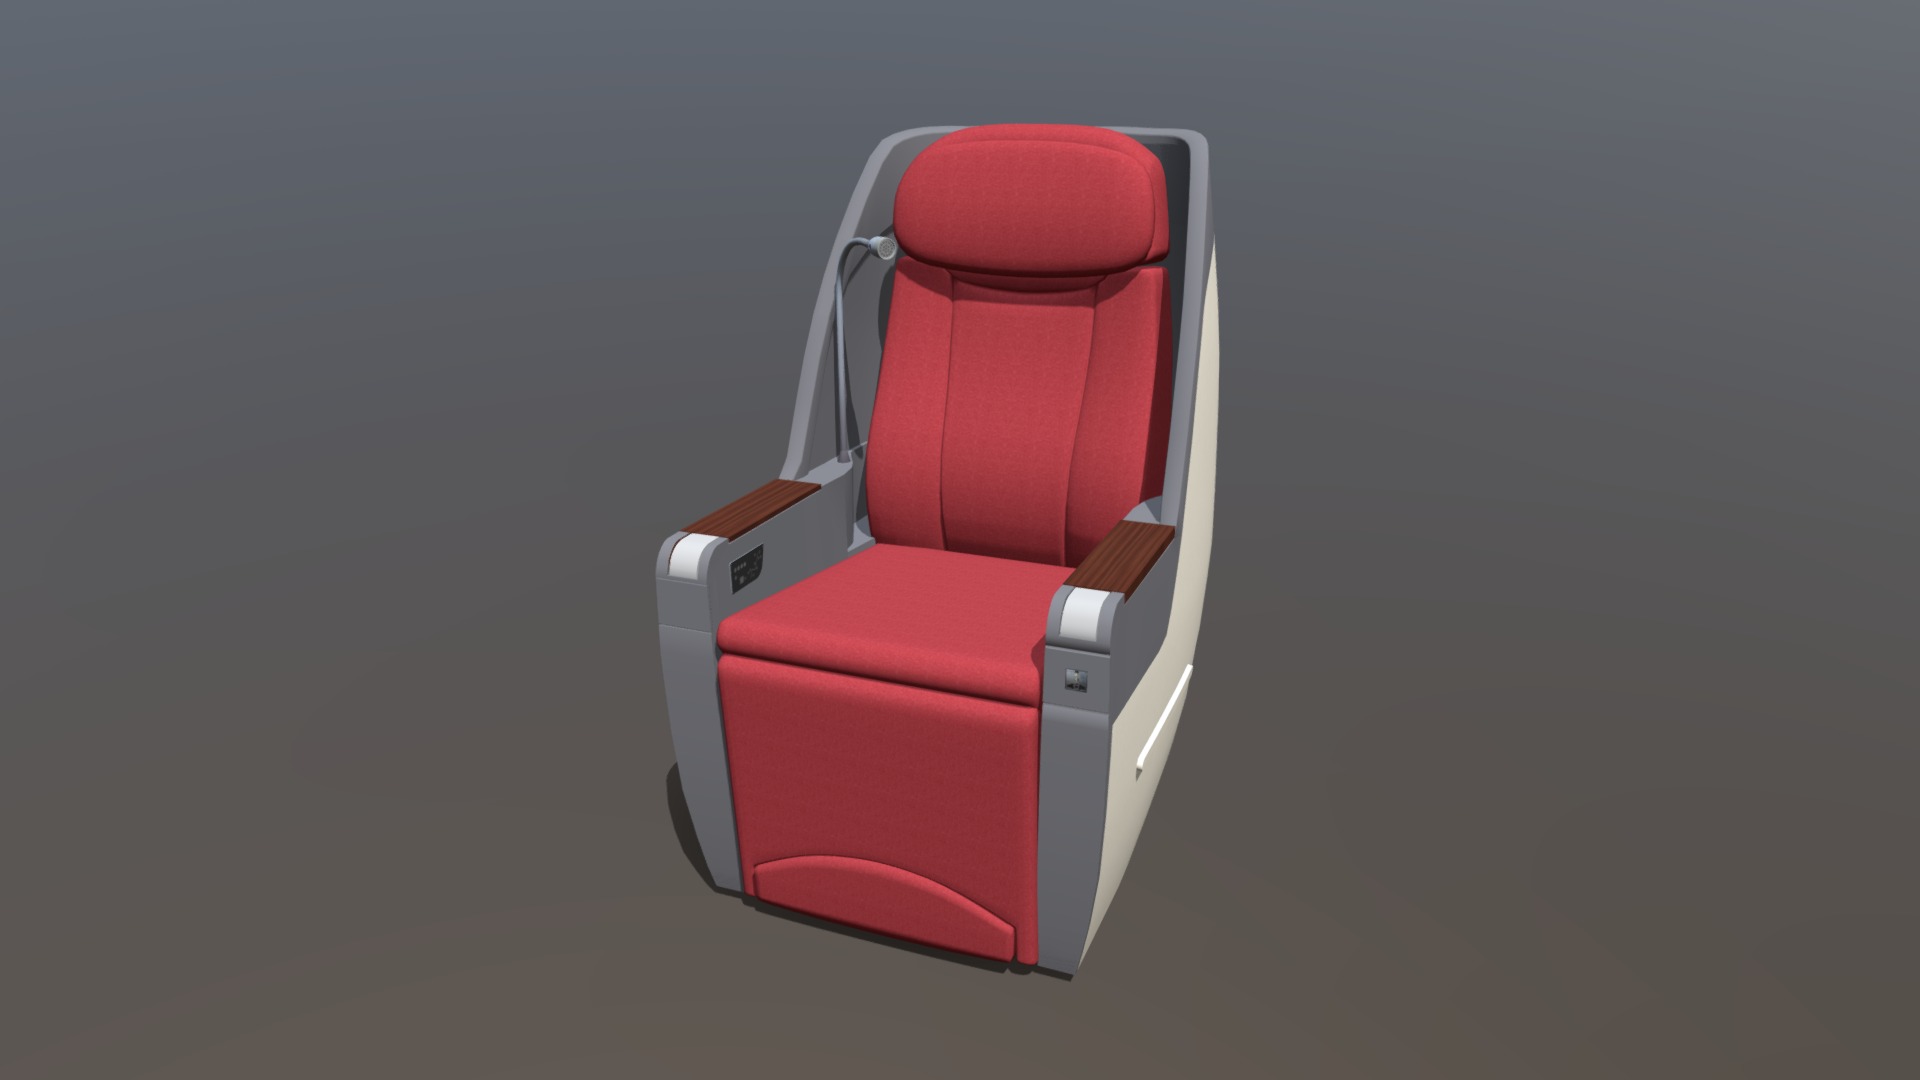 3D model Train seat 016 - This is a 3D model of the Train seat 016. The 3D model is about a red and white chair.